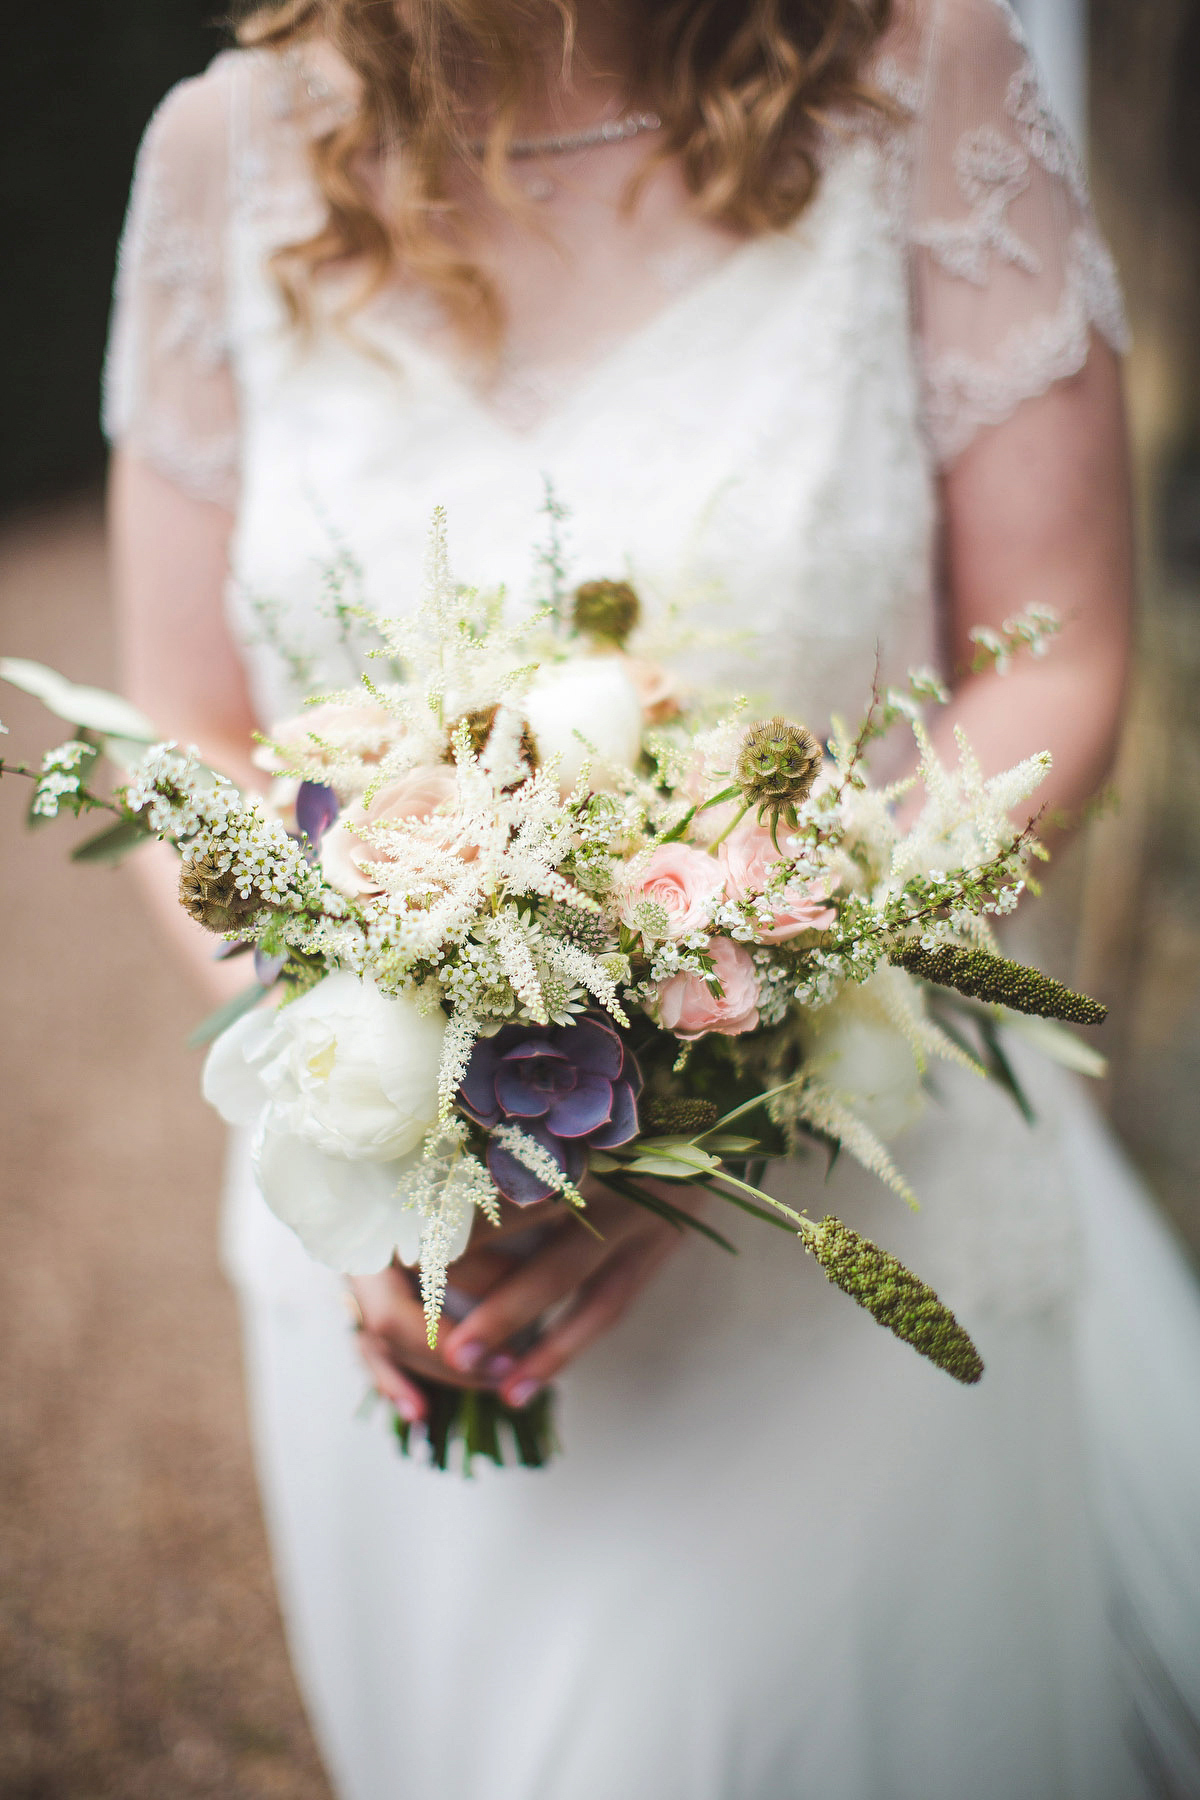 Jenny Packham and wildflower elegance for a Peak District Wedding in pastel shades. Images by S6 Photography.